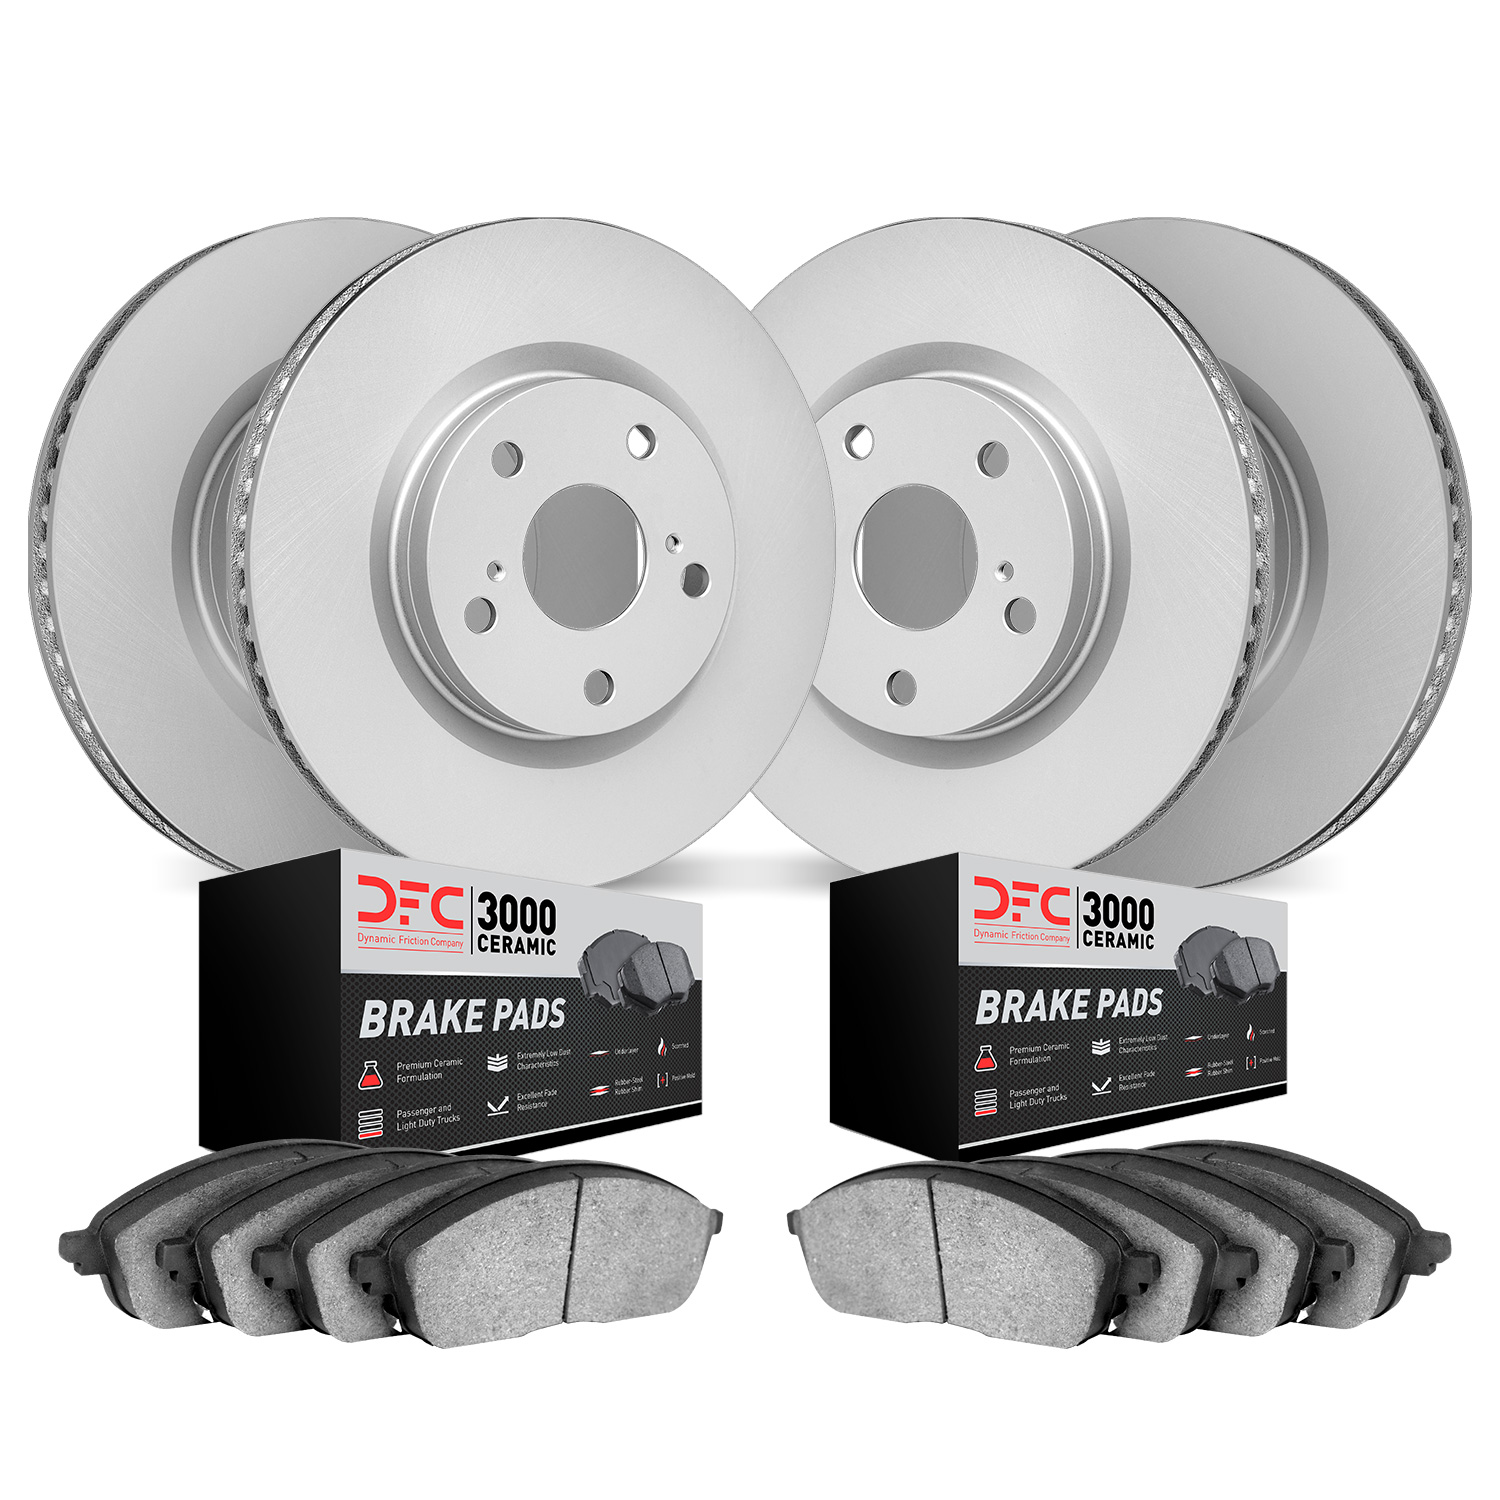 4304-75013 Geospec Brake Rotors with 3000-Series Ceramic Brake Pads Kit, 2007-2011 Lexus/Toyota/Scion, Position: Front and Rear